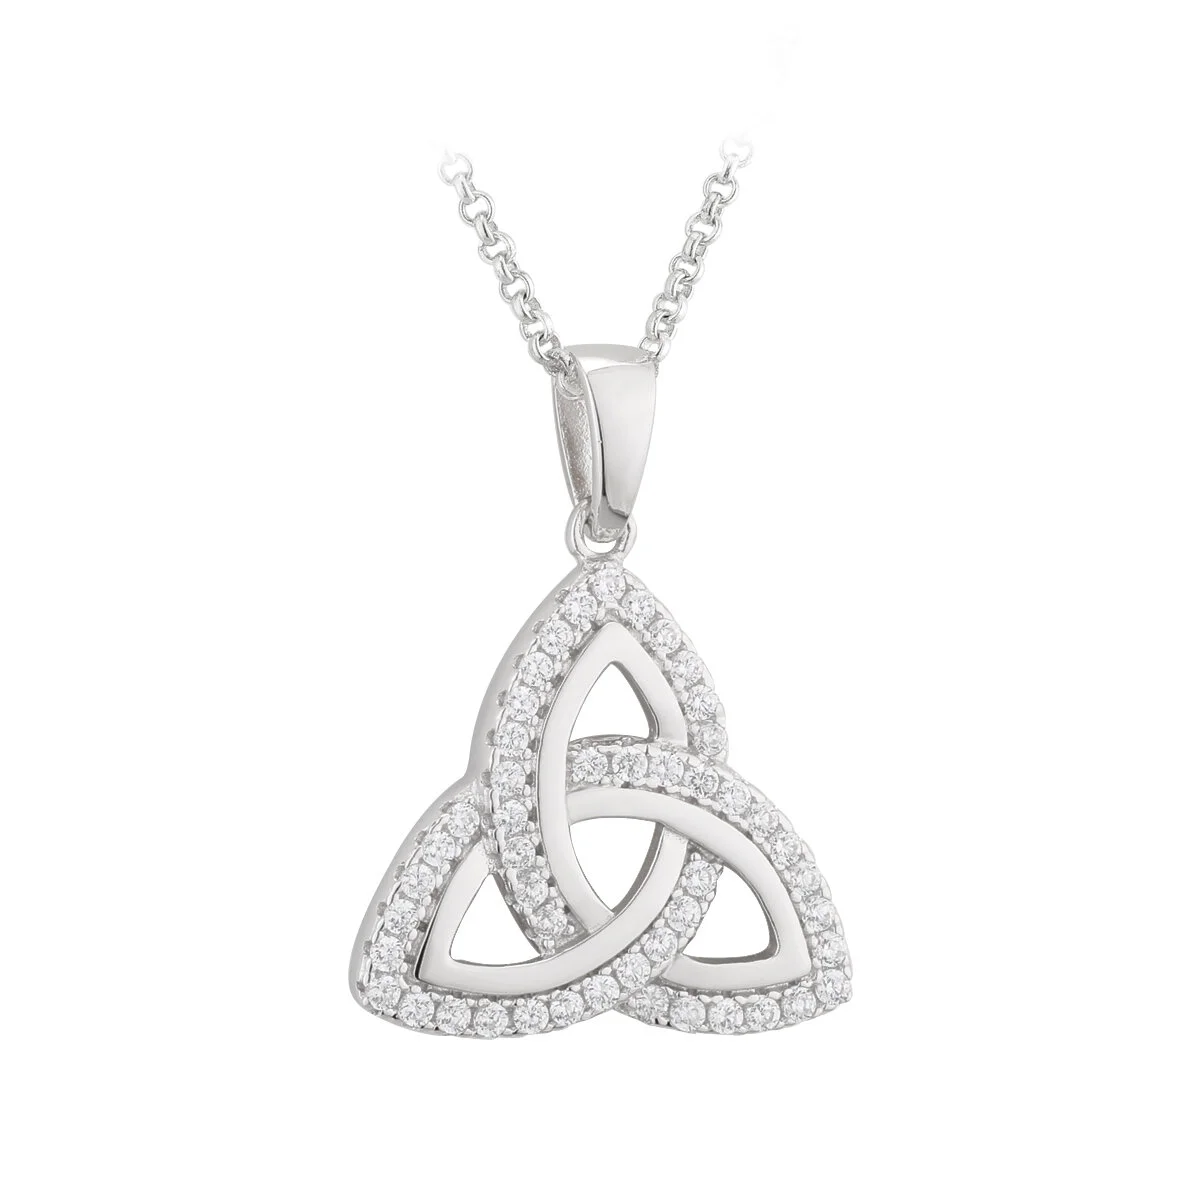 Sterling Silver Trinity Knot Pendant Inlaid With Cubic Zirconia Gemstones 6...